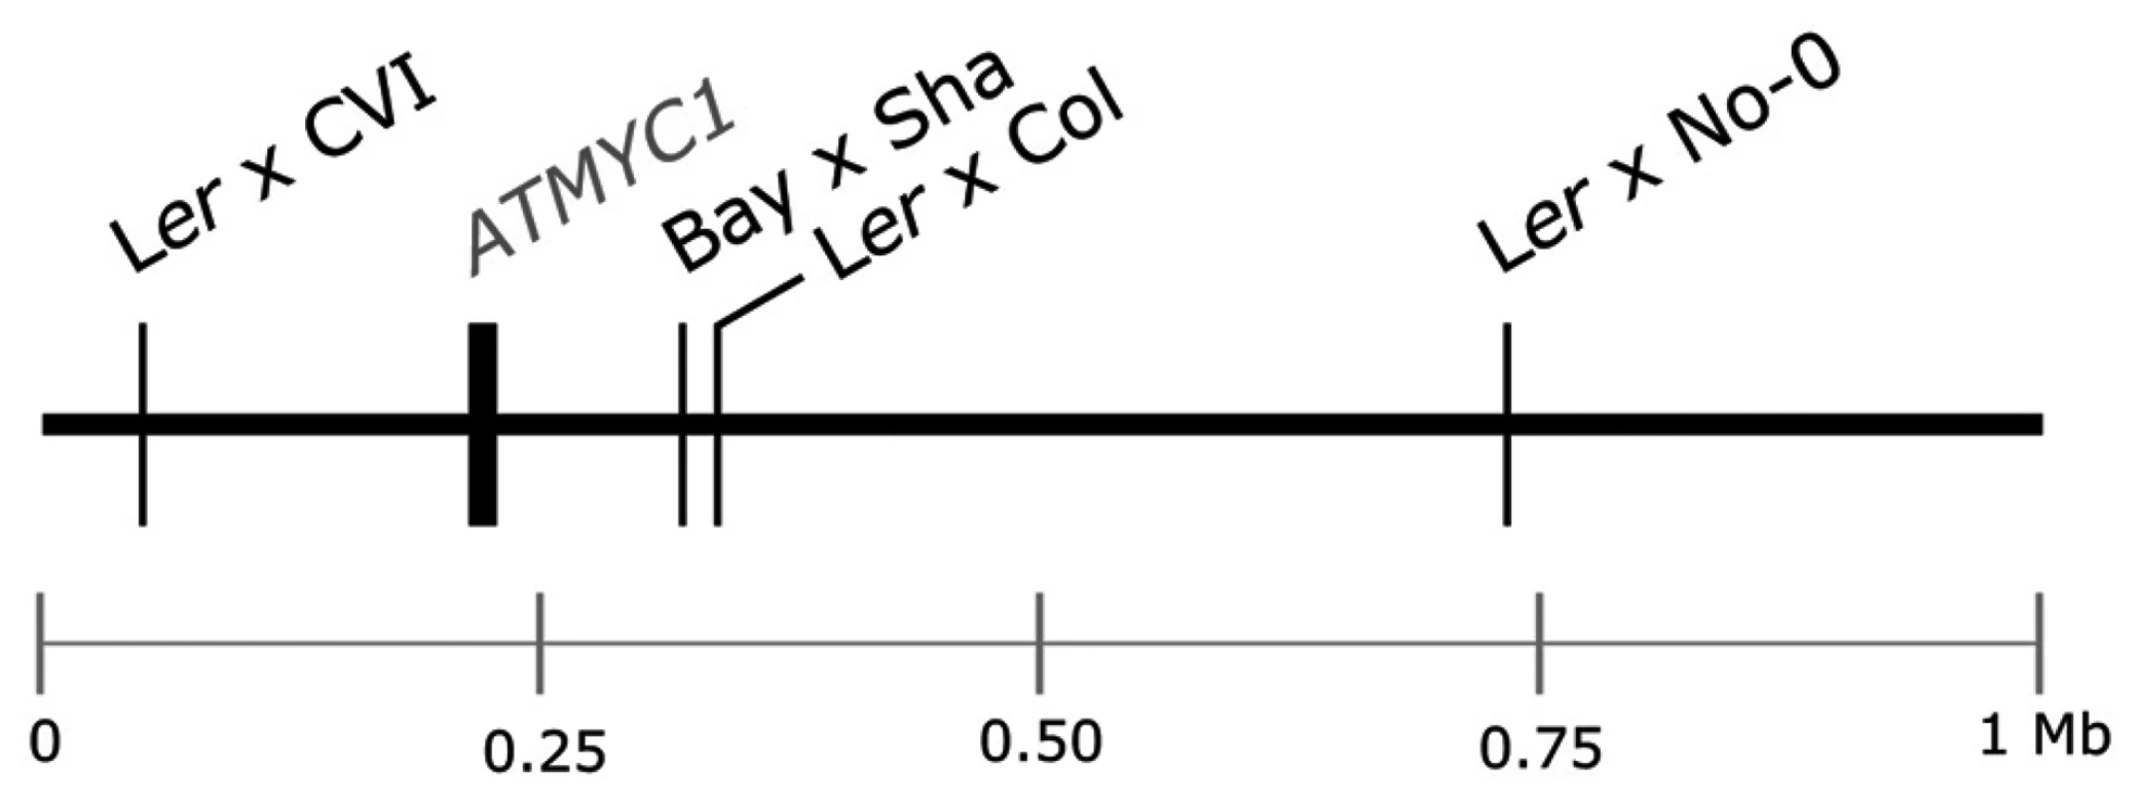 Schematic of the top 1 Mb of the physical map of chromosome four of <i>A. thaliana</i>.